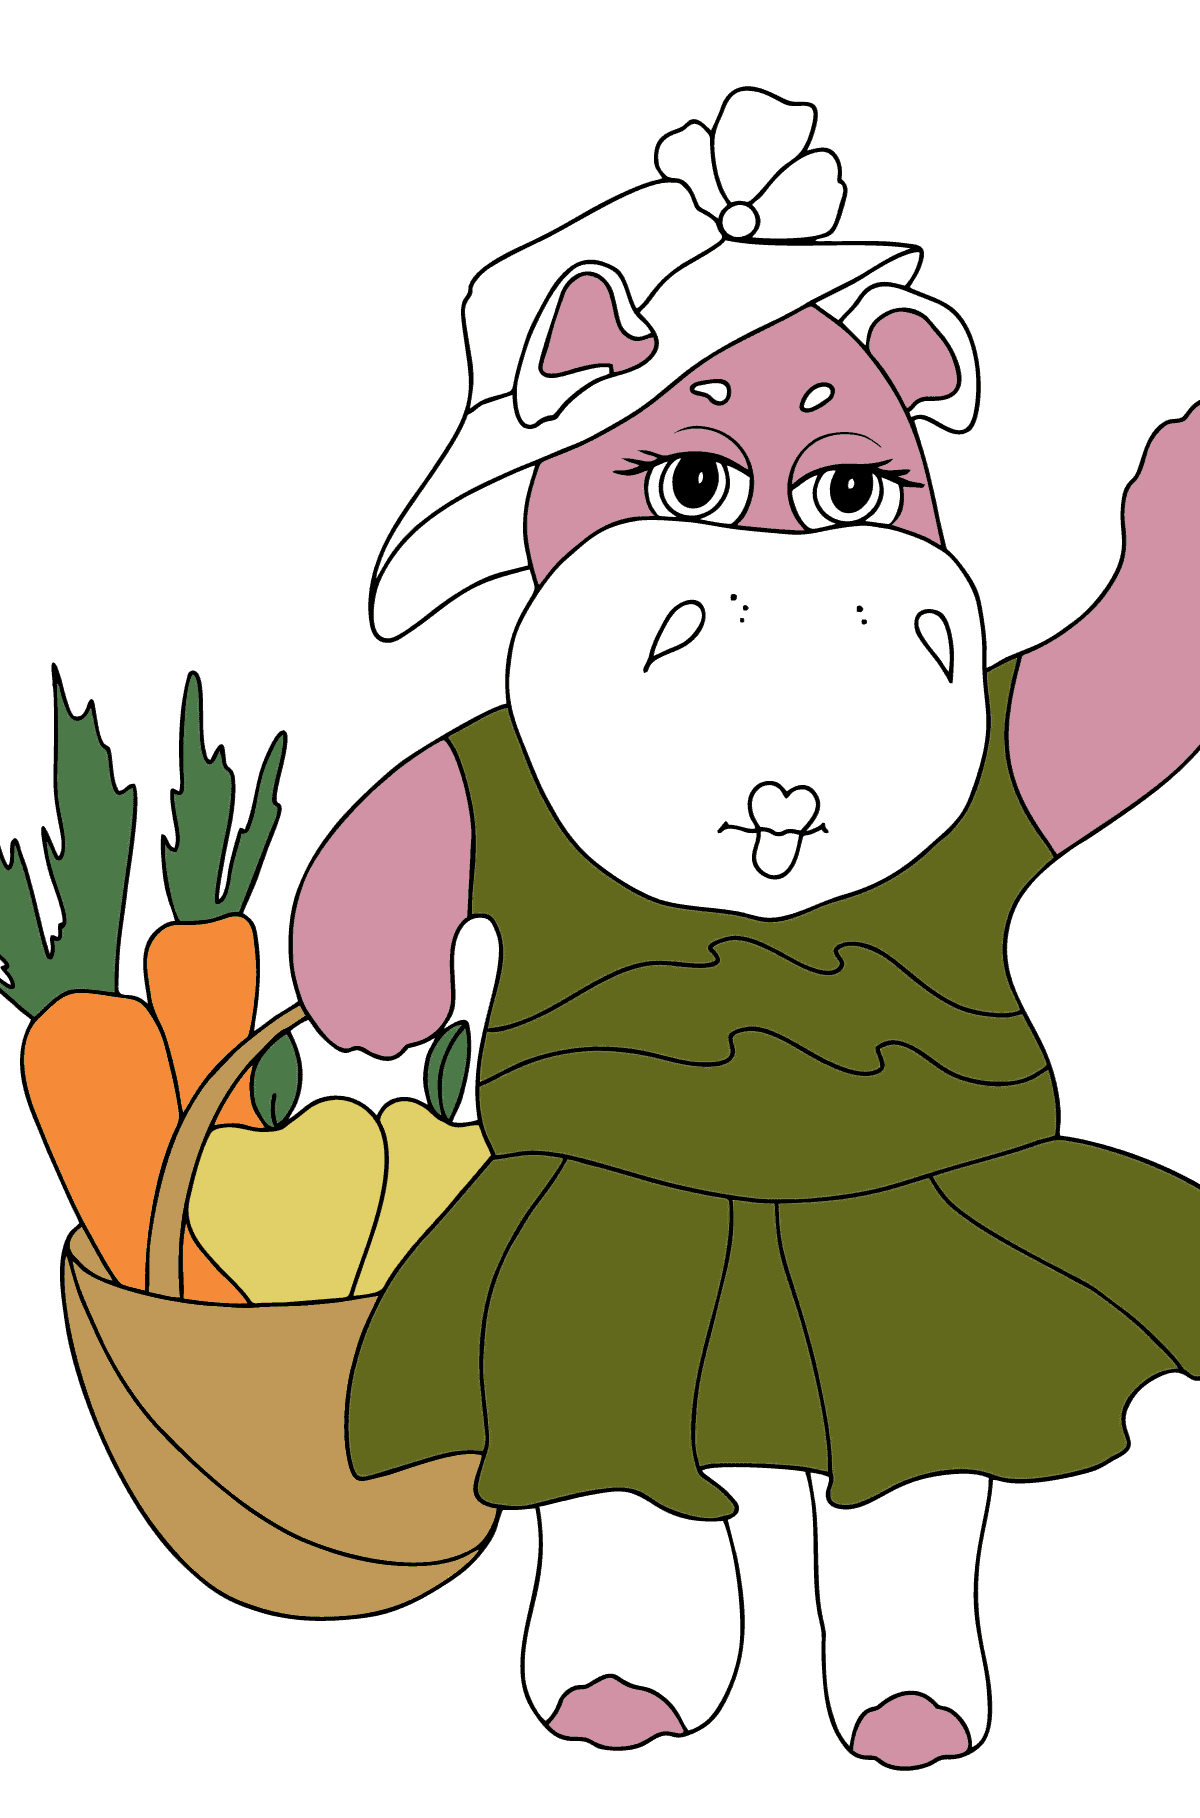 Coloring Page - A Hippo with a Basket of Carrots and Apples - Check it Out for Kids 